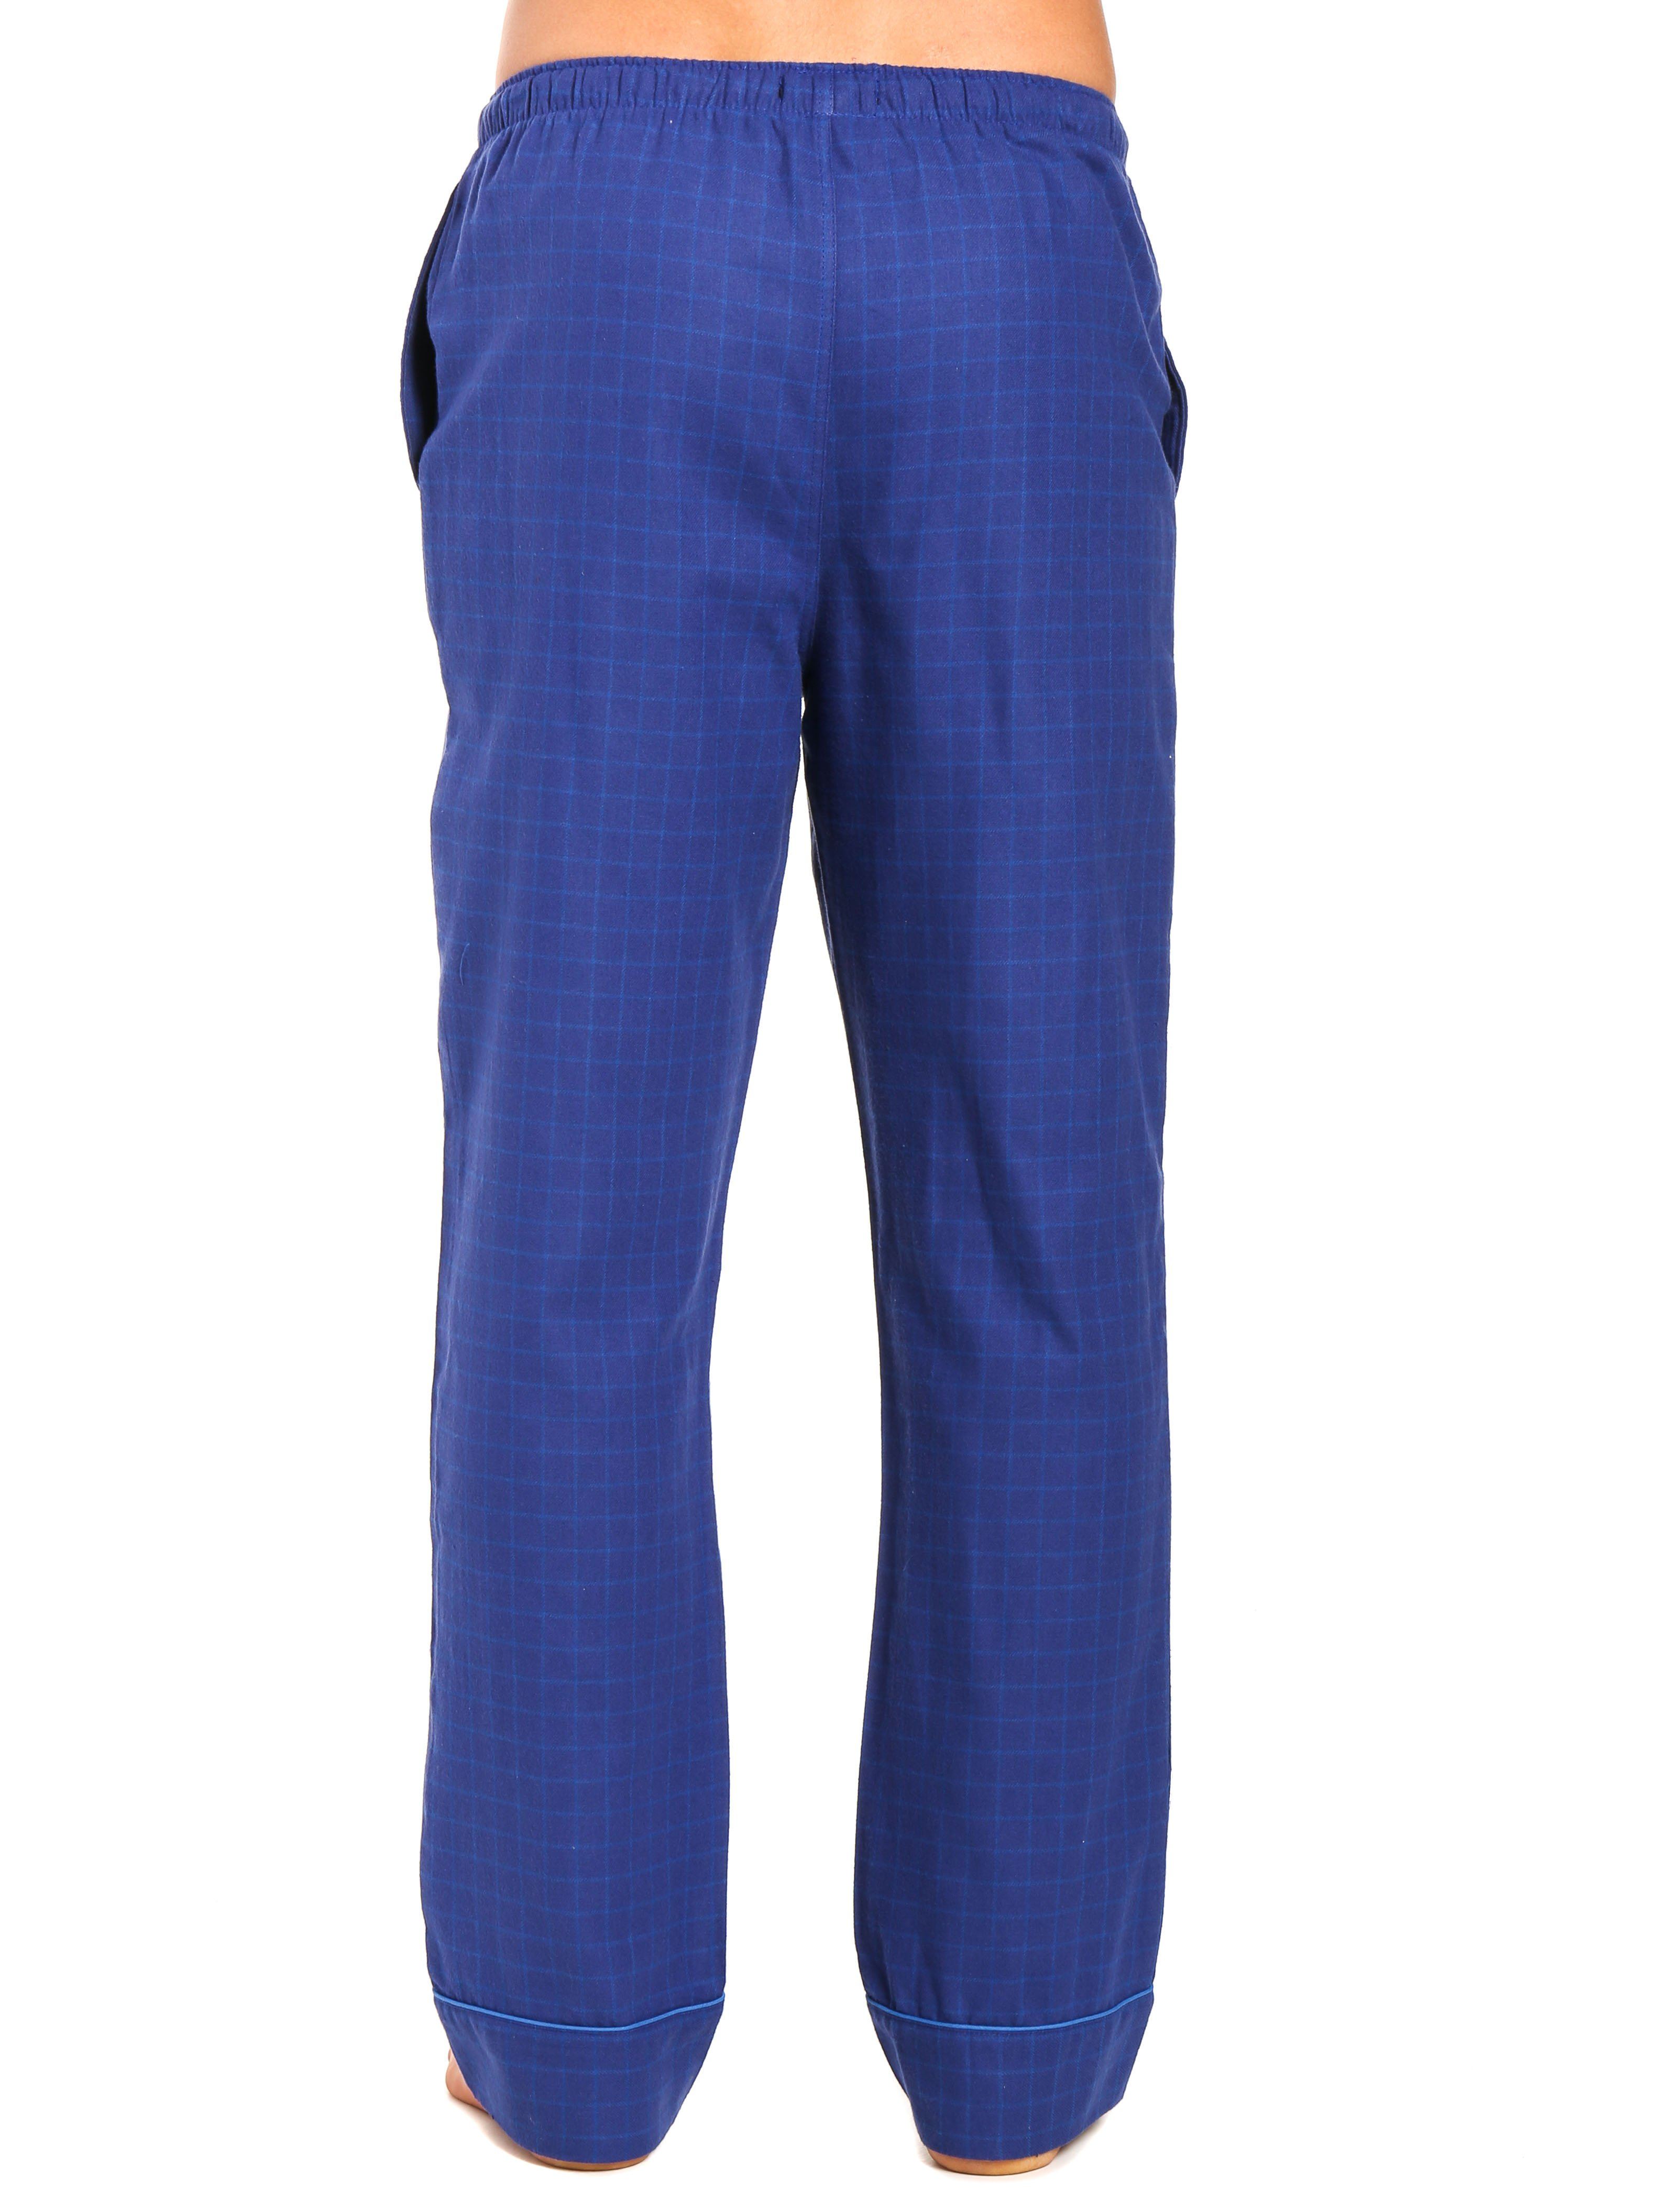 Buy Men's Blue All Over Printed Cotton Lounge Pants Online in India at  Bewakoof